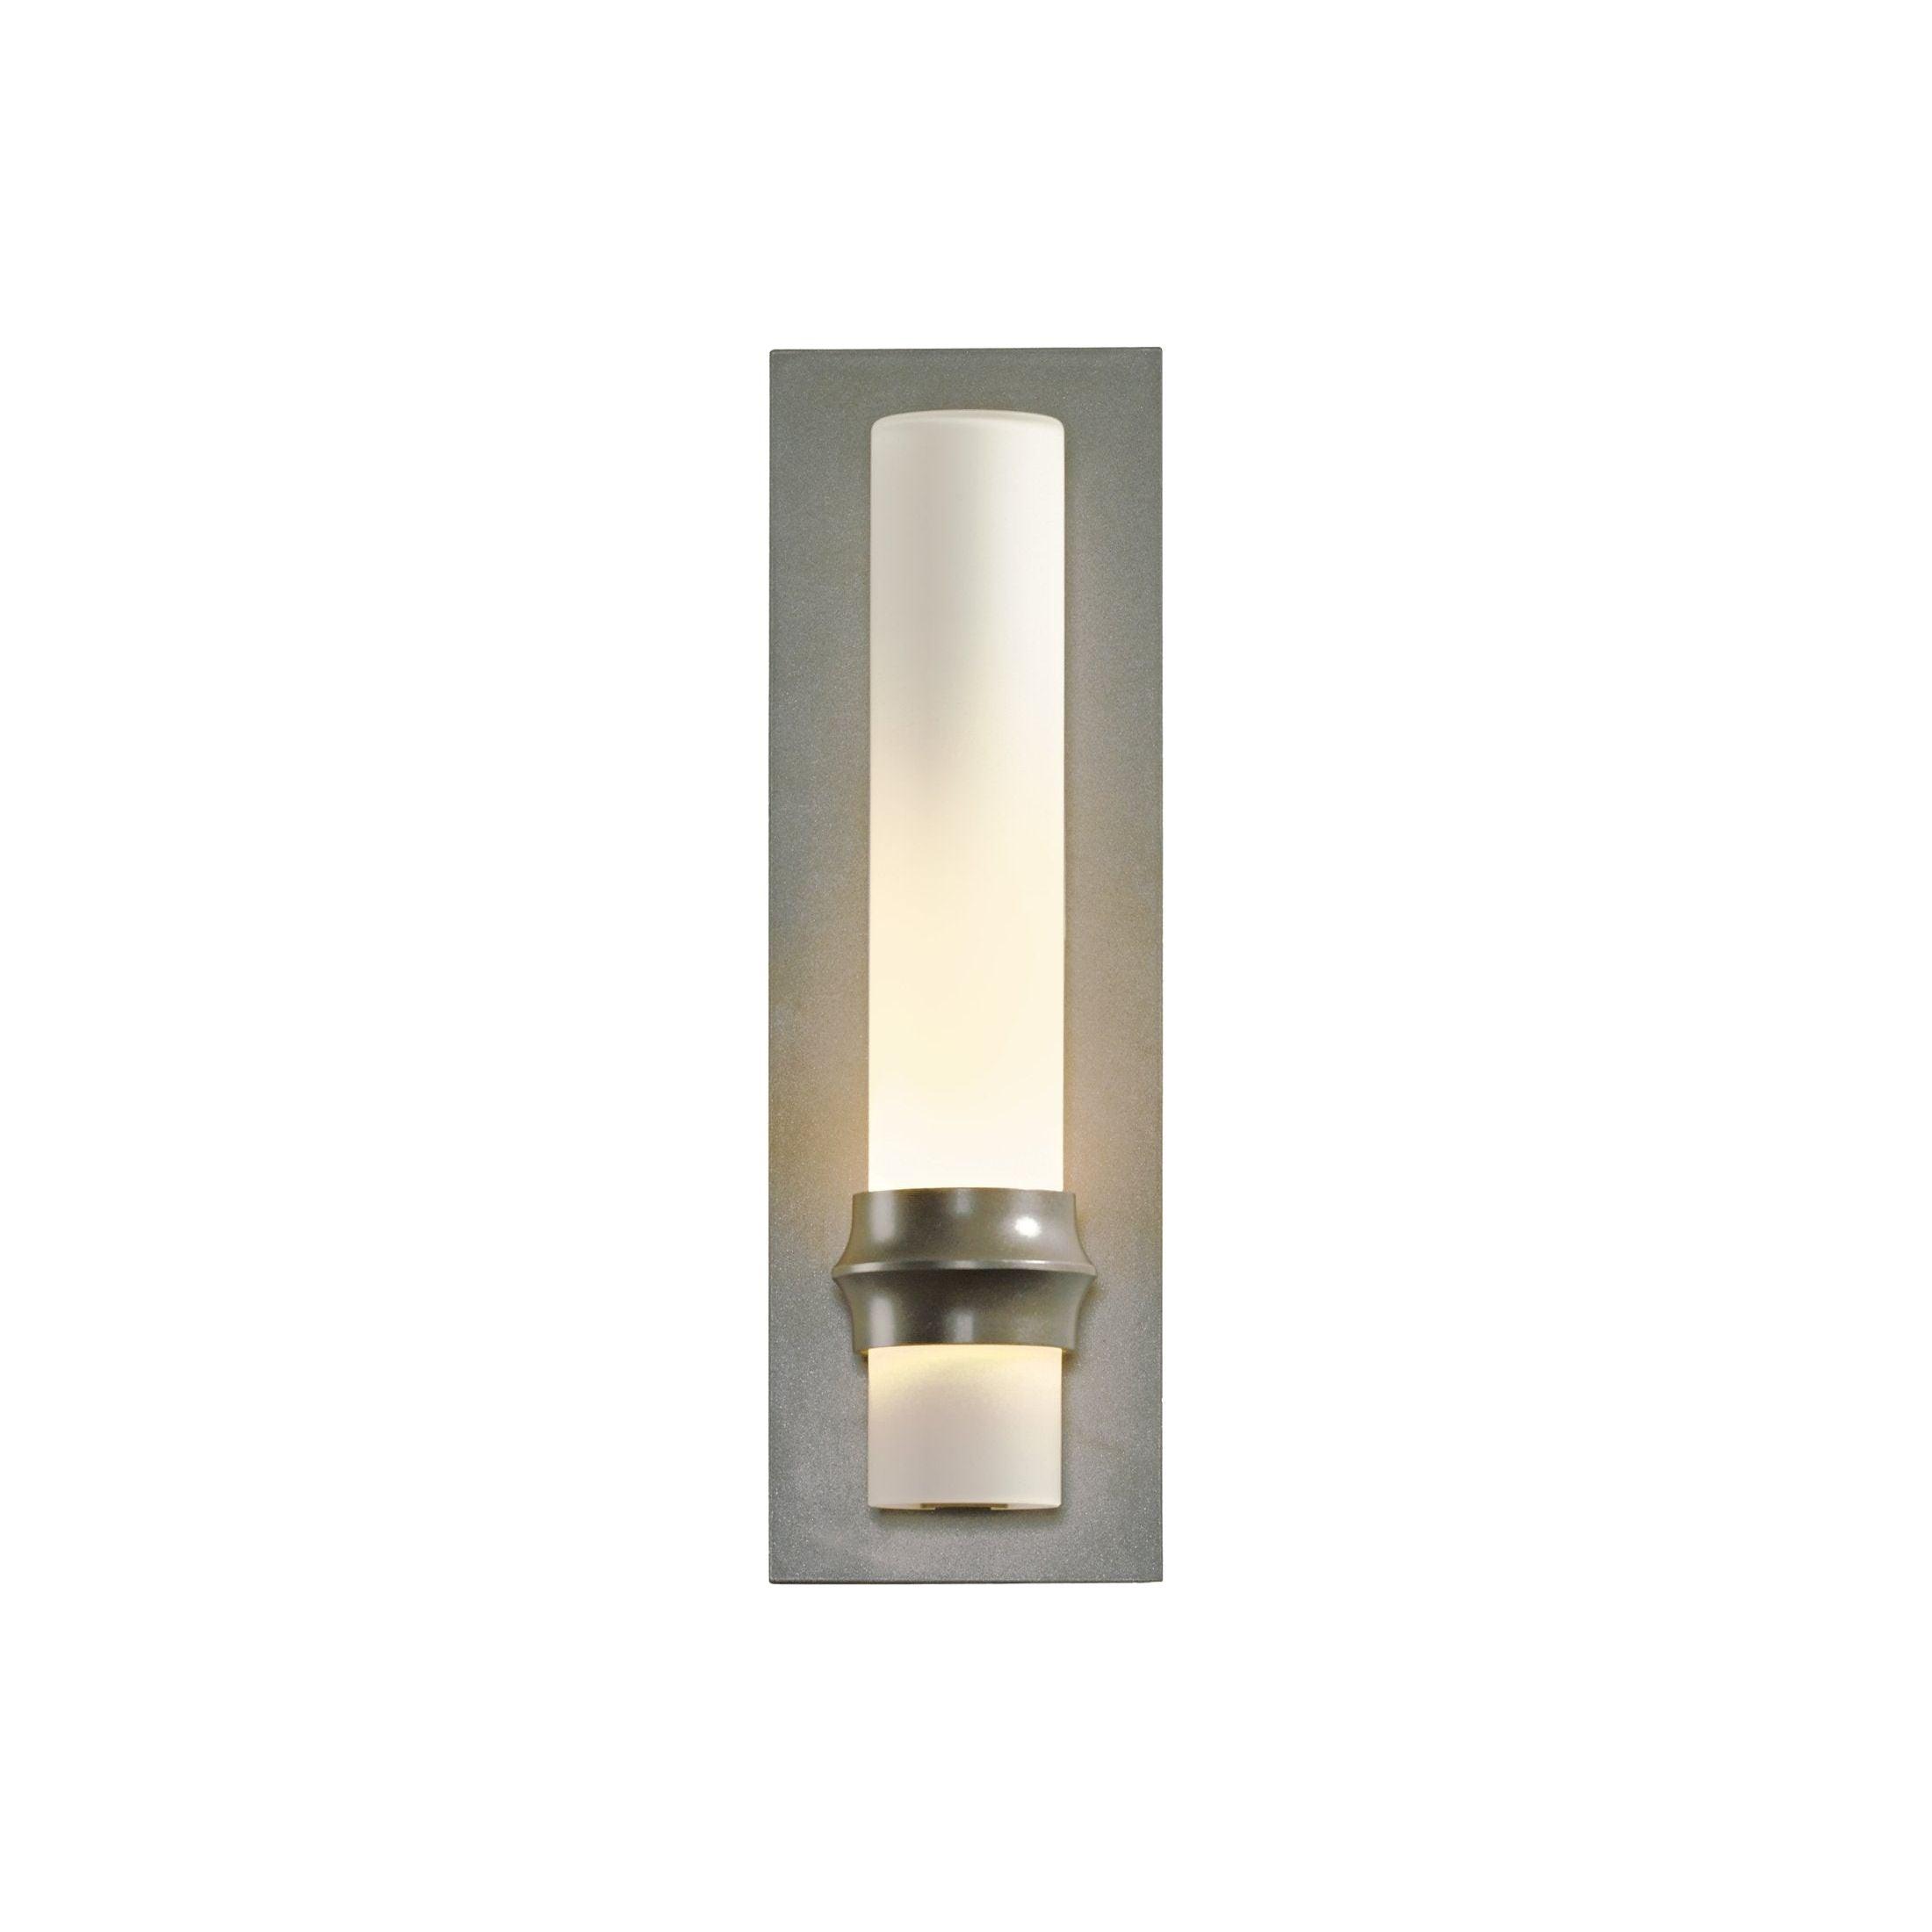 Hubbardton Forge - Rook Outdoor-Wall-Light - Lights Canada